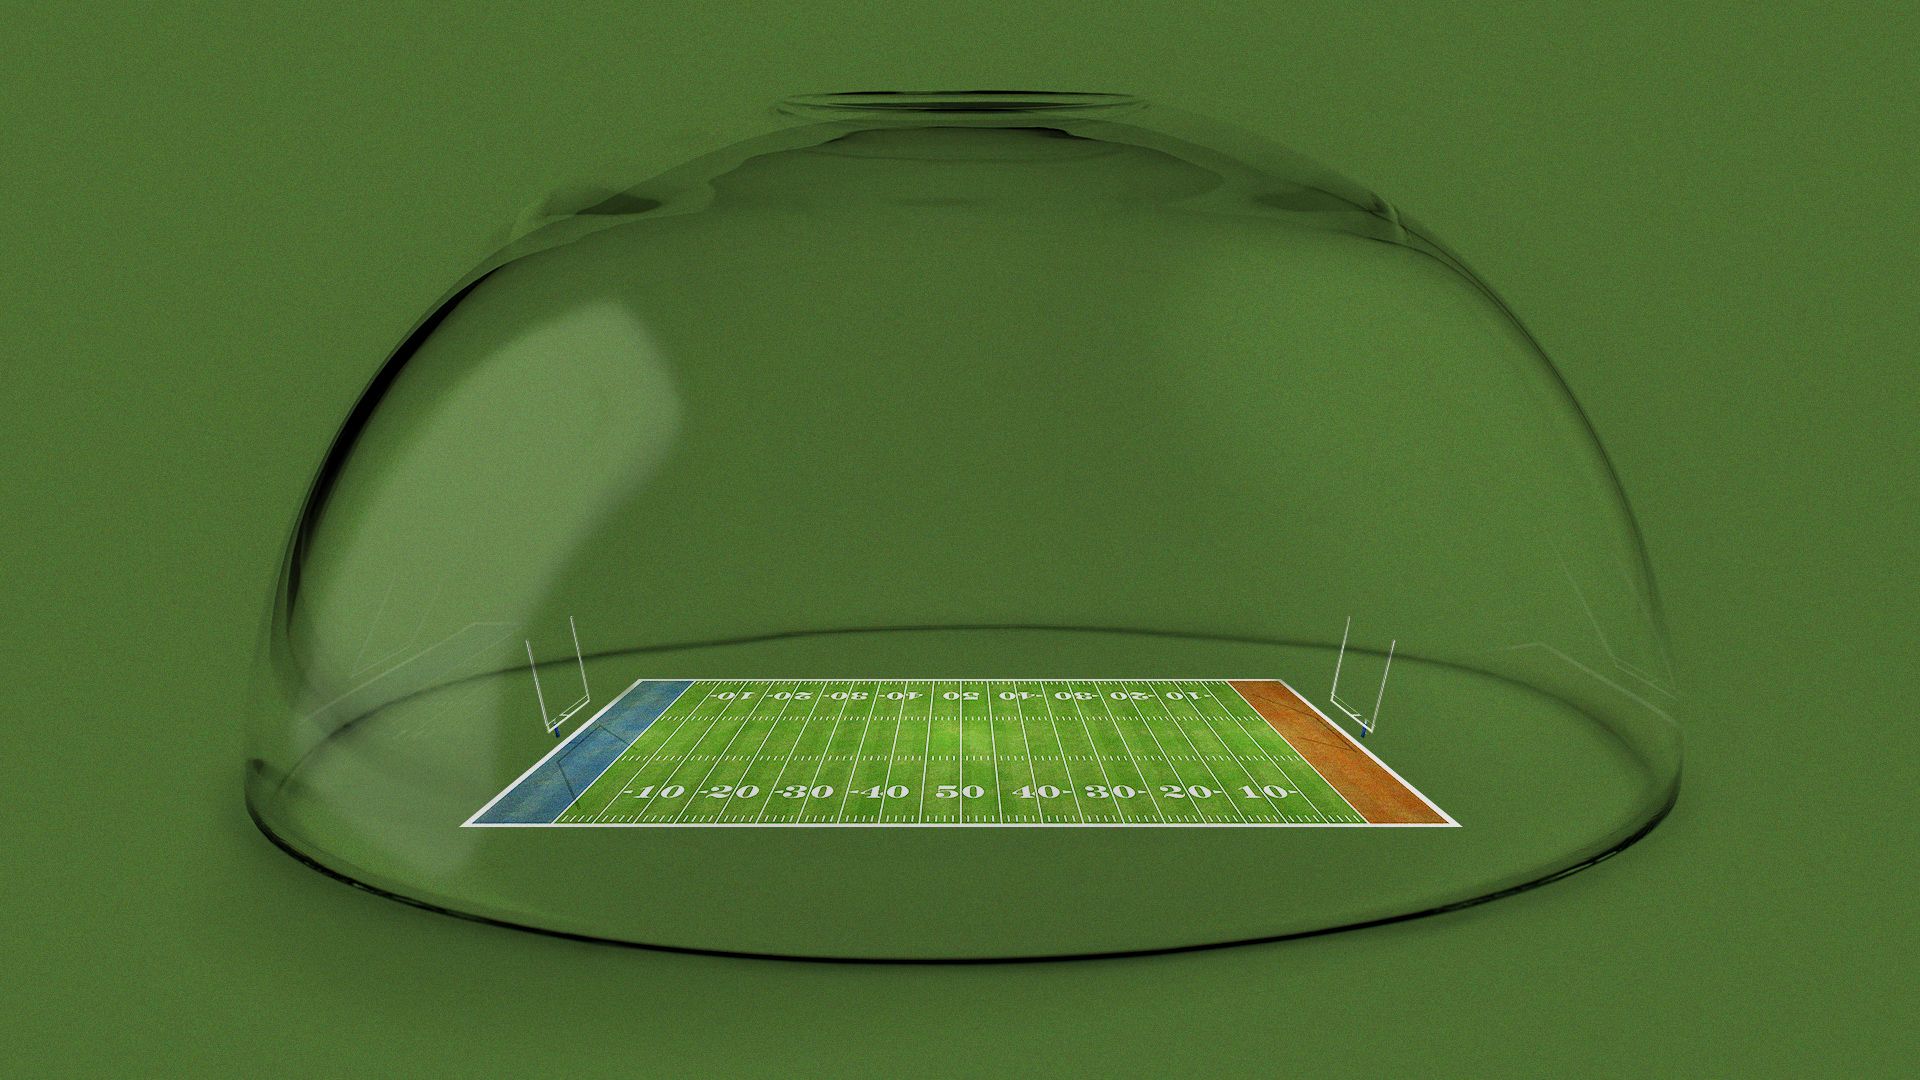 Illustration of a football field under a glass dome.